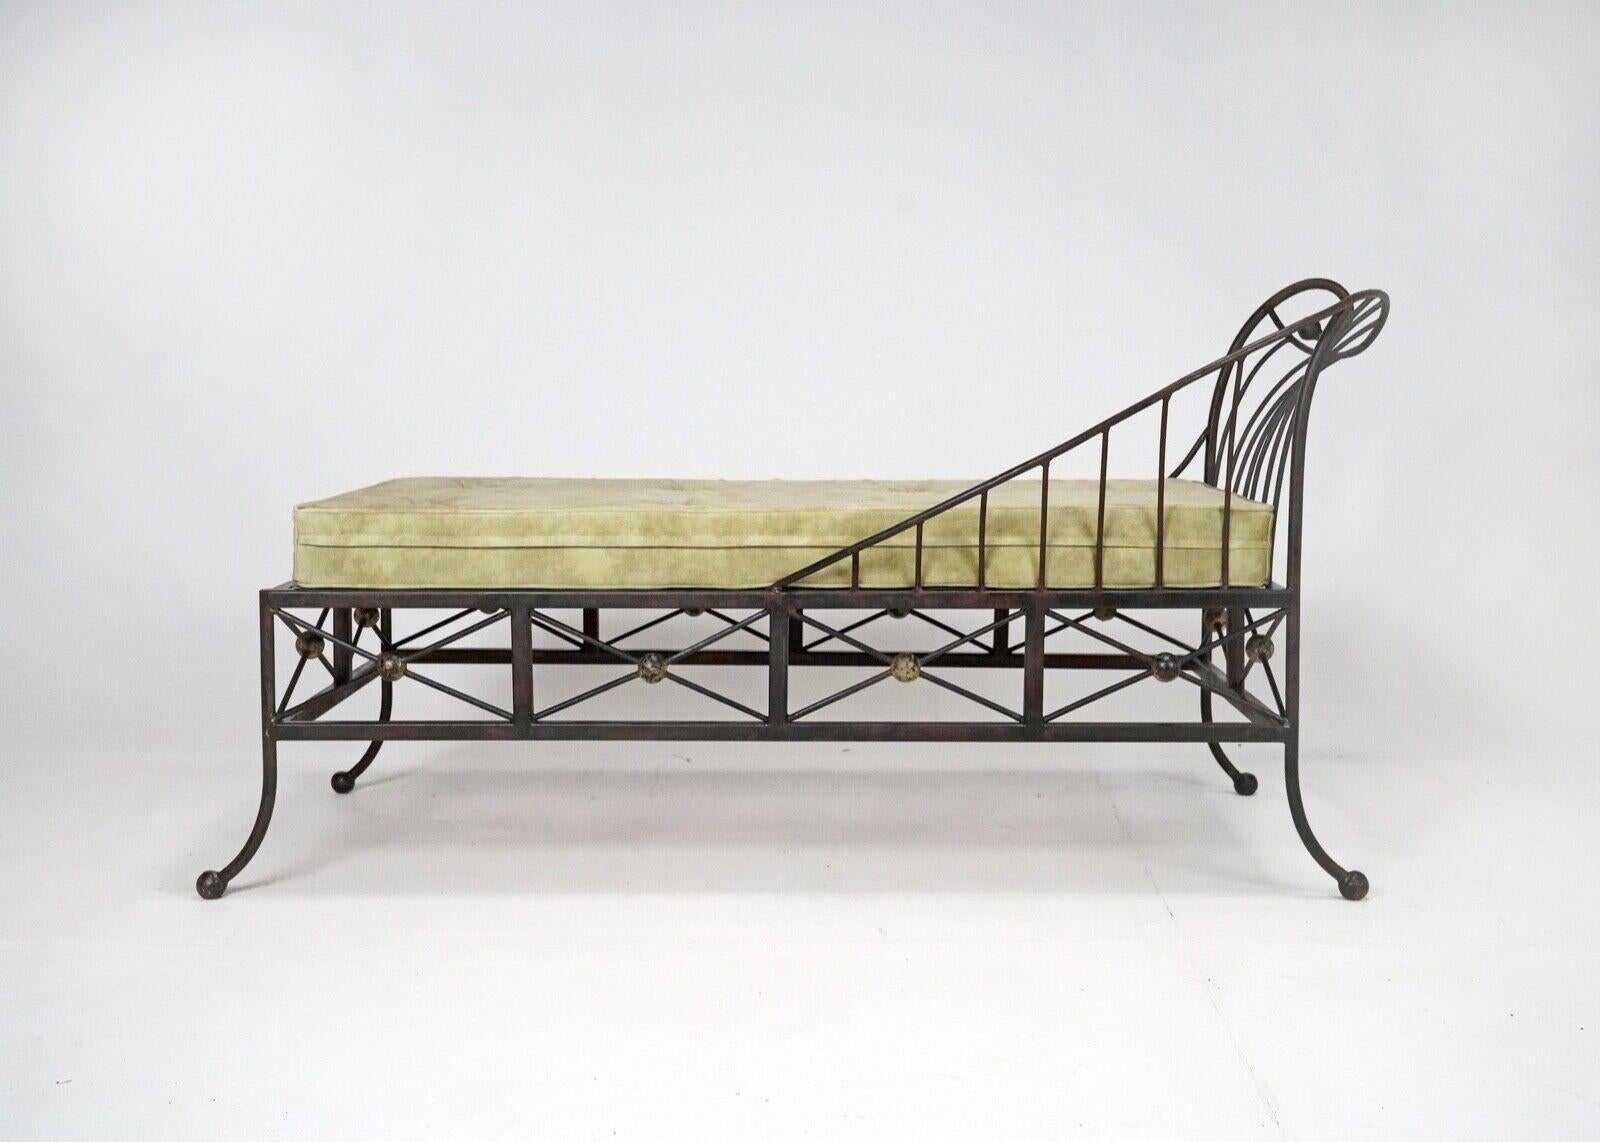 Art Deco Vintage French Box Steel Metal Day Bed, Sun Lounger, Chaise Lounge Green Seat